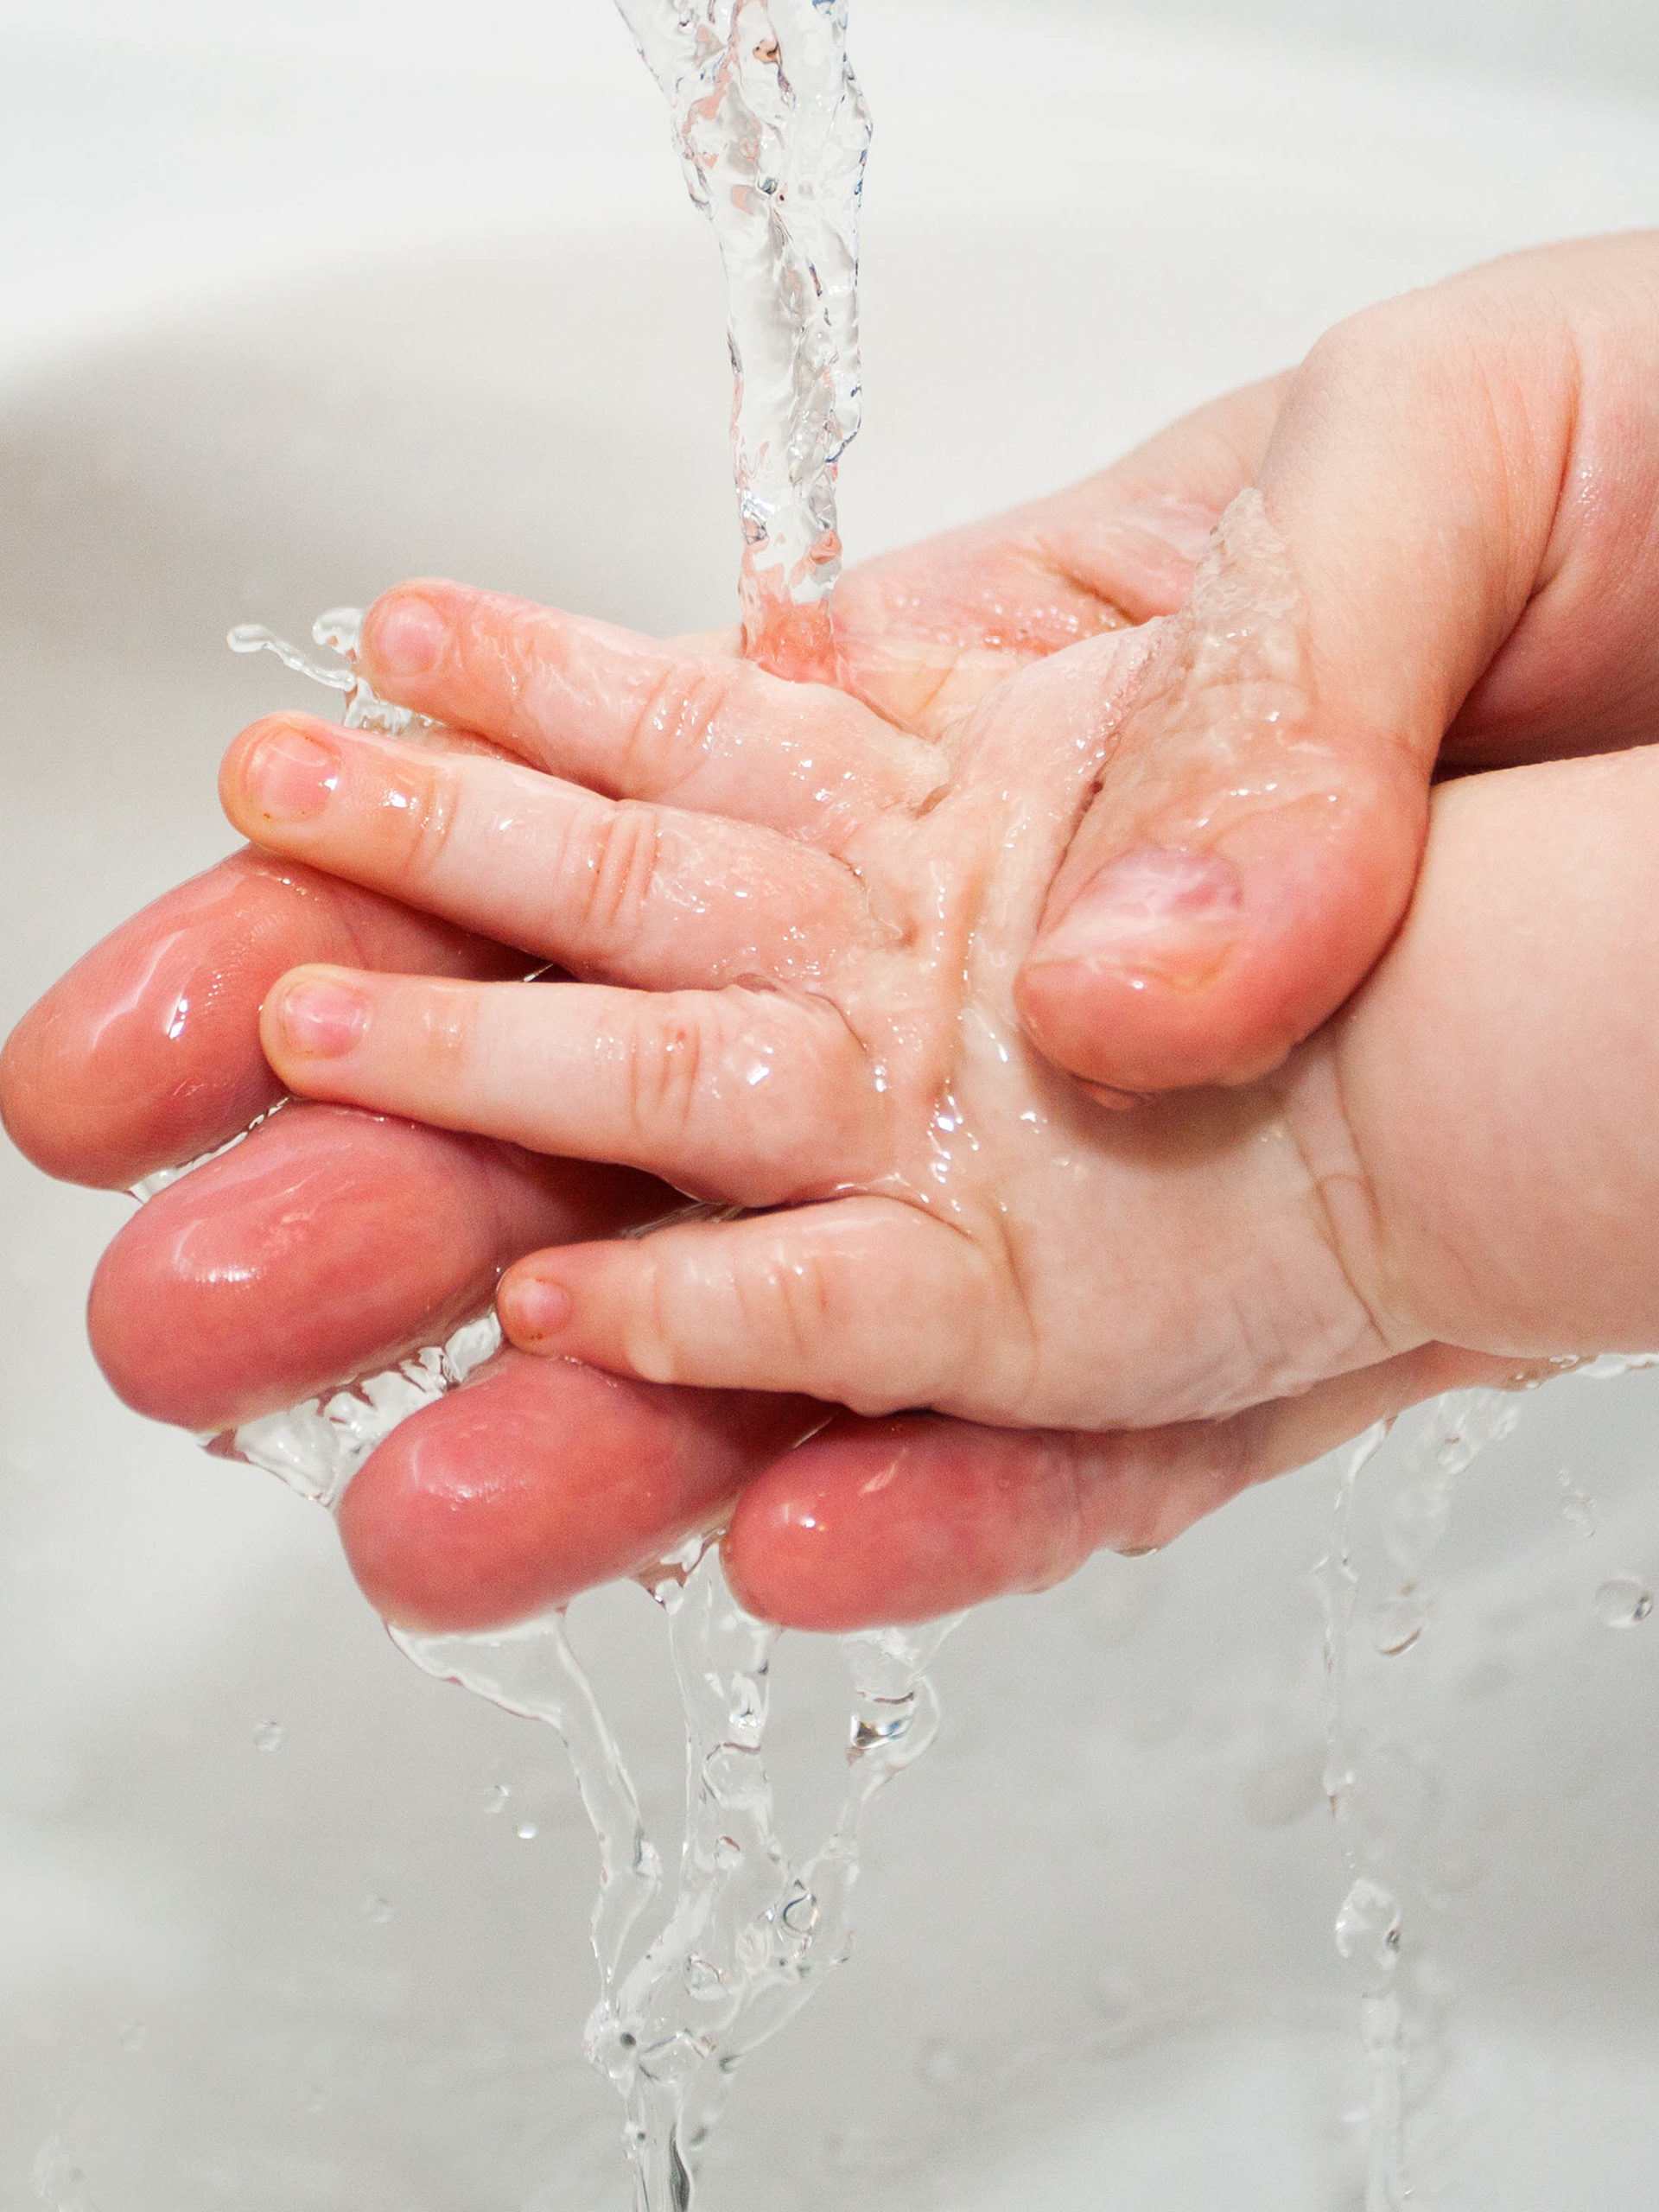 parent washing baby hand with water in the sink